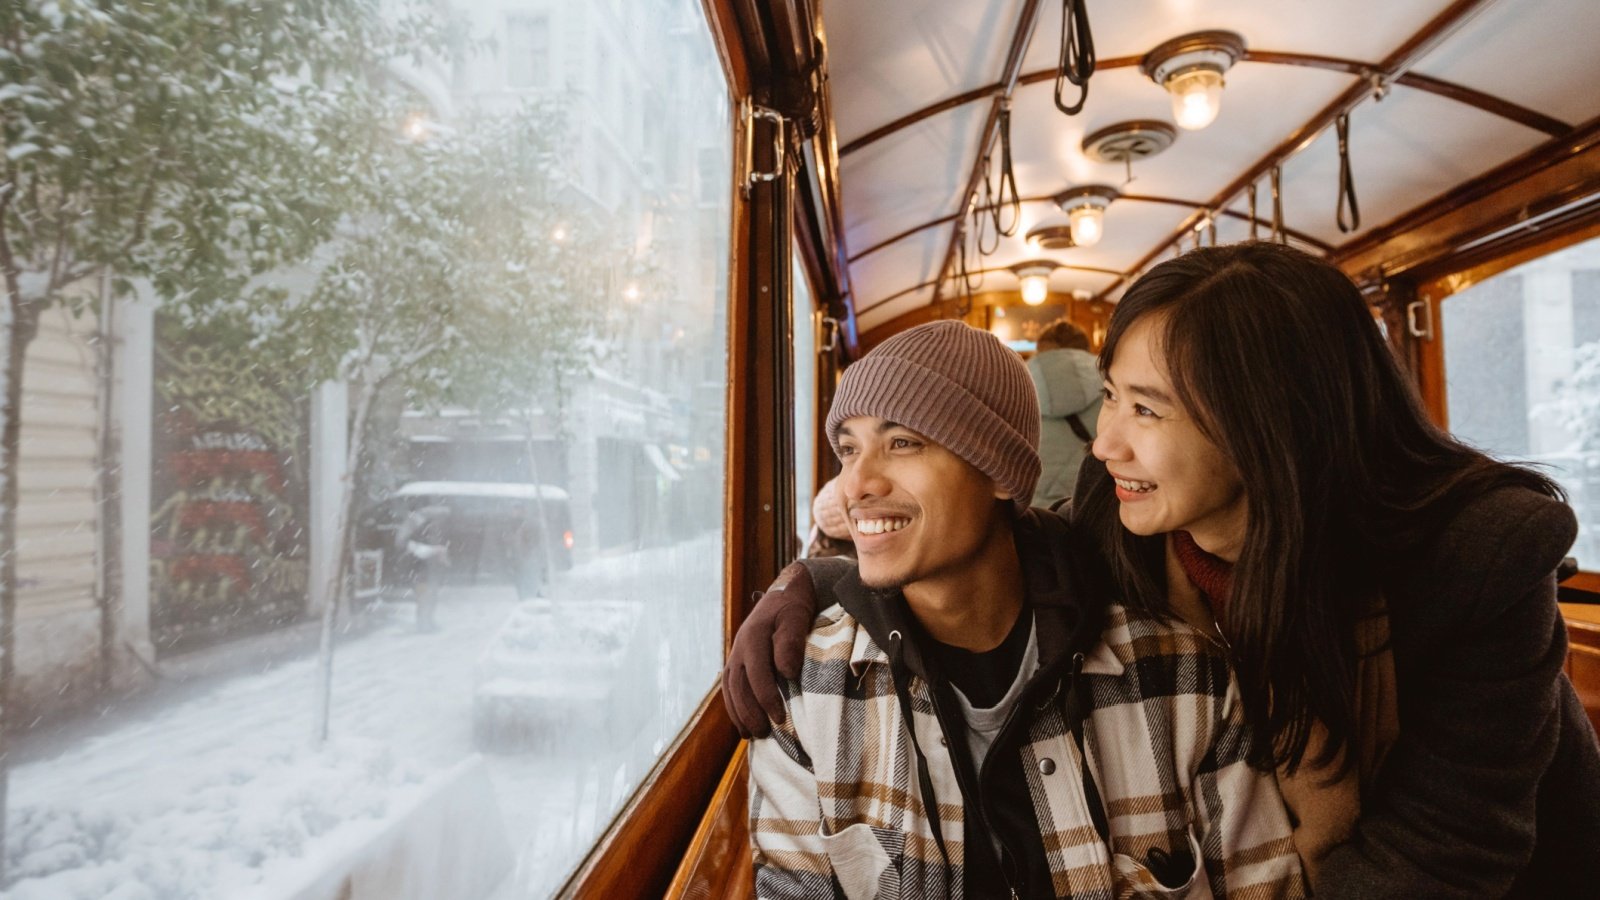 <p>While it may mean dealing with cold or wet weather, traveling during off-peak seasons can help you find cheaper accommodation and transportation deals. It’s also more pleasurable if there are fewer tourists.</p><p>Remember, there’s no such thing as bad weather if you are dressed correctly. If you’ll be traveling through the rainy season, have warm boots and a raincoat. If it is winter time, have a cozy coat and plan indoor activities, or head to the mountains for snow sports.</p>